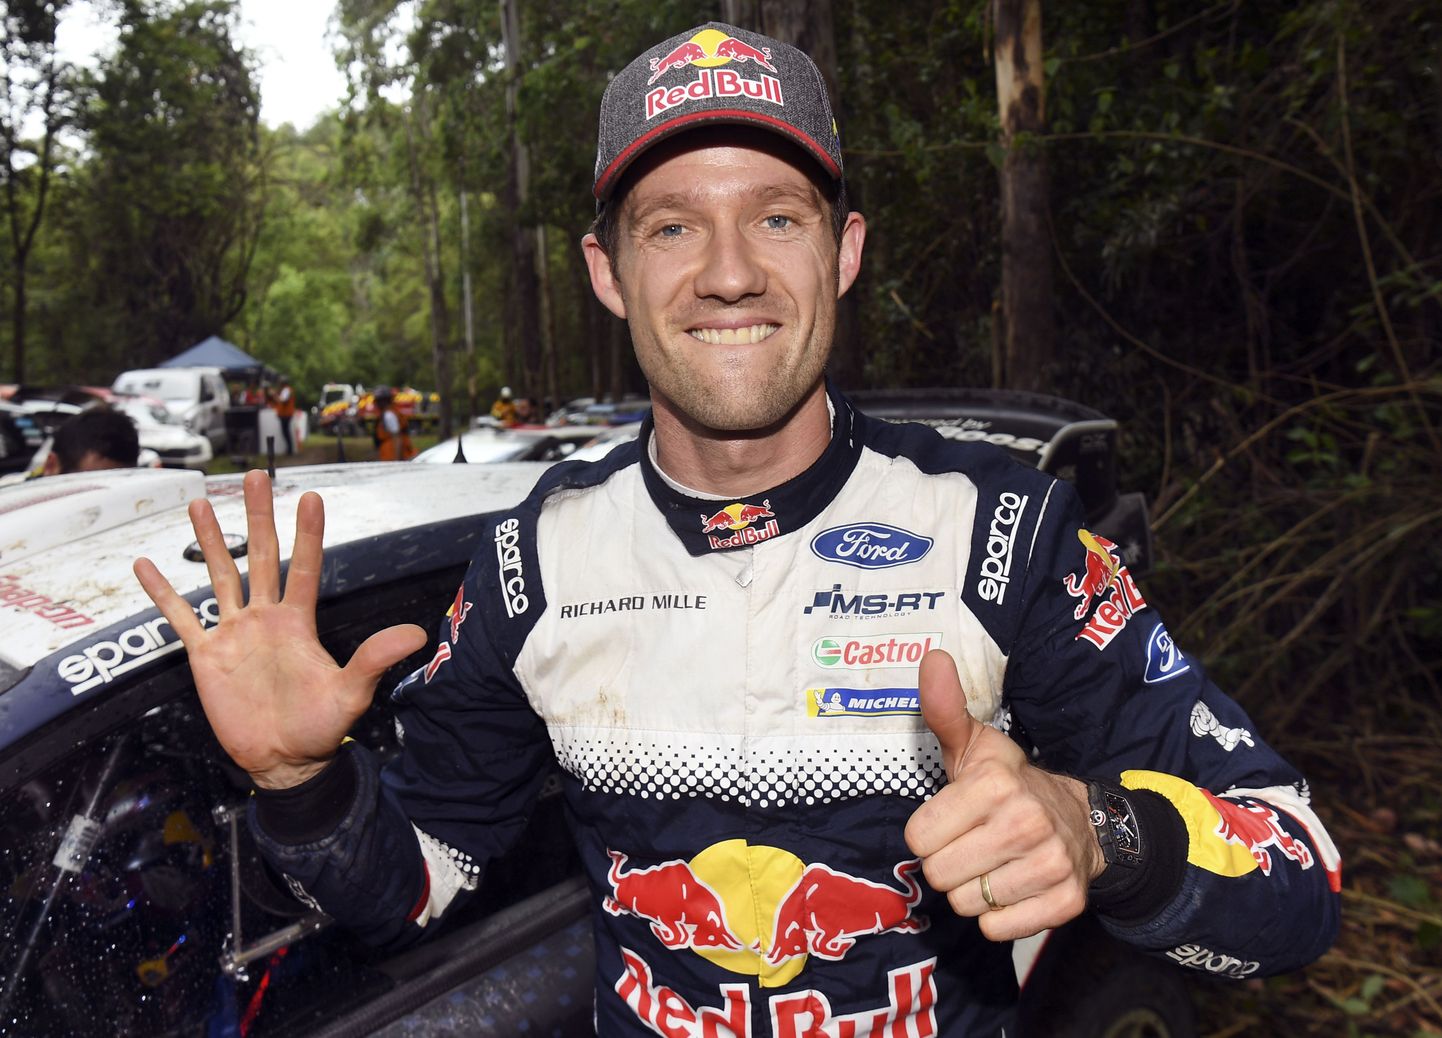 Ford driver Sebastien Ogier of France celebrates winning his sixth world rally title after finishing fifth on the final day of the World Rally Championship (WRC) Rally Australia near Coffs Harbour on November 18, 2018. (Photo by WILLIAM WEST / AFP) / -- IMAGE RESTRICTED TO EDITORIAL USE - STRICTLY NO COMMERCIAL USE --